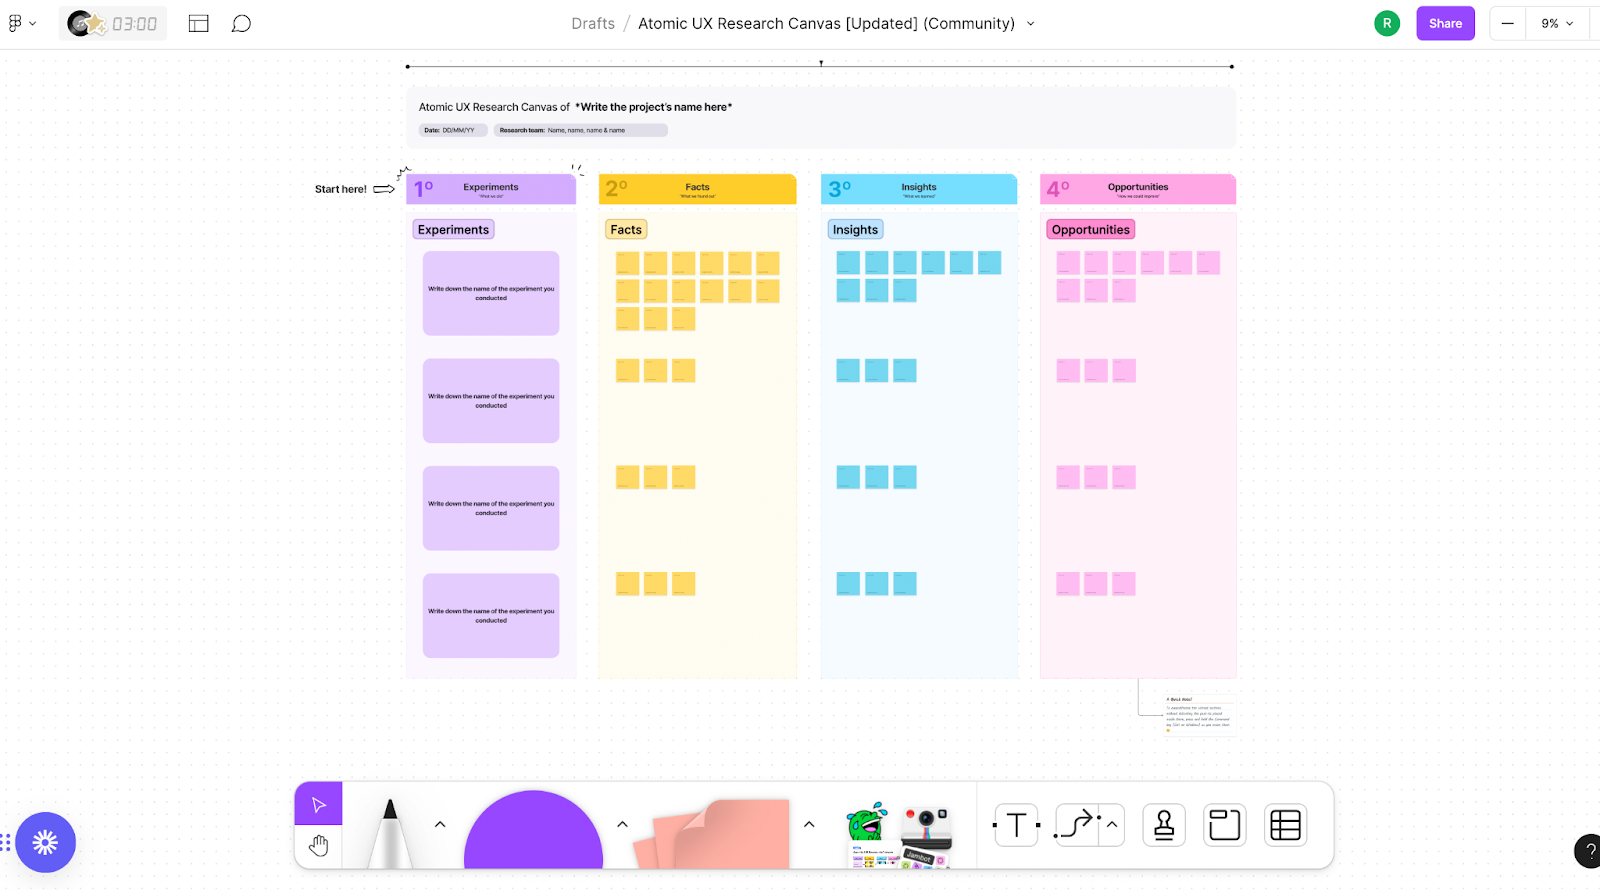 ux research report template figma